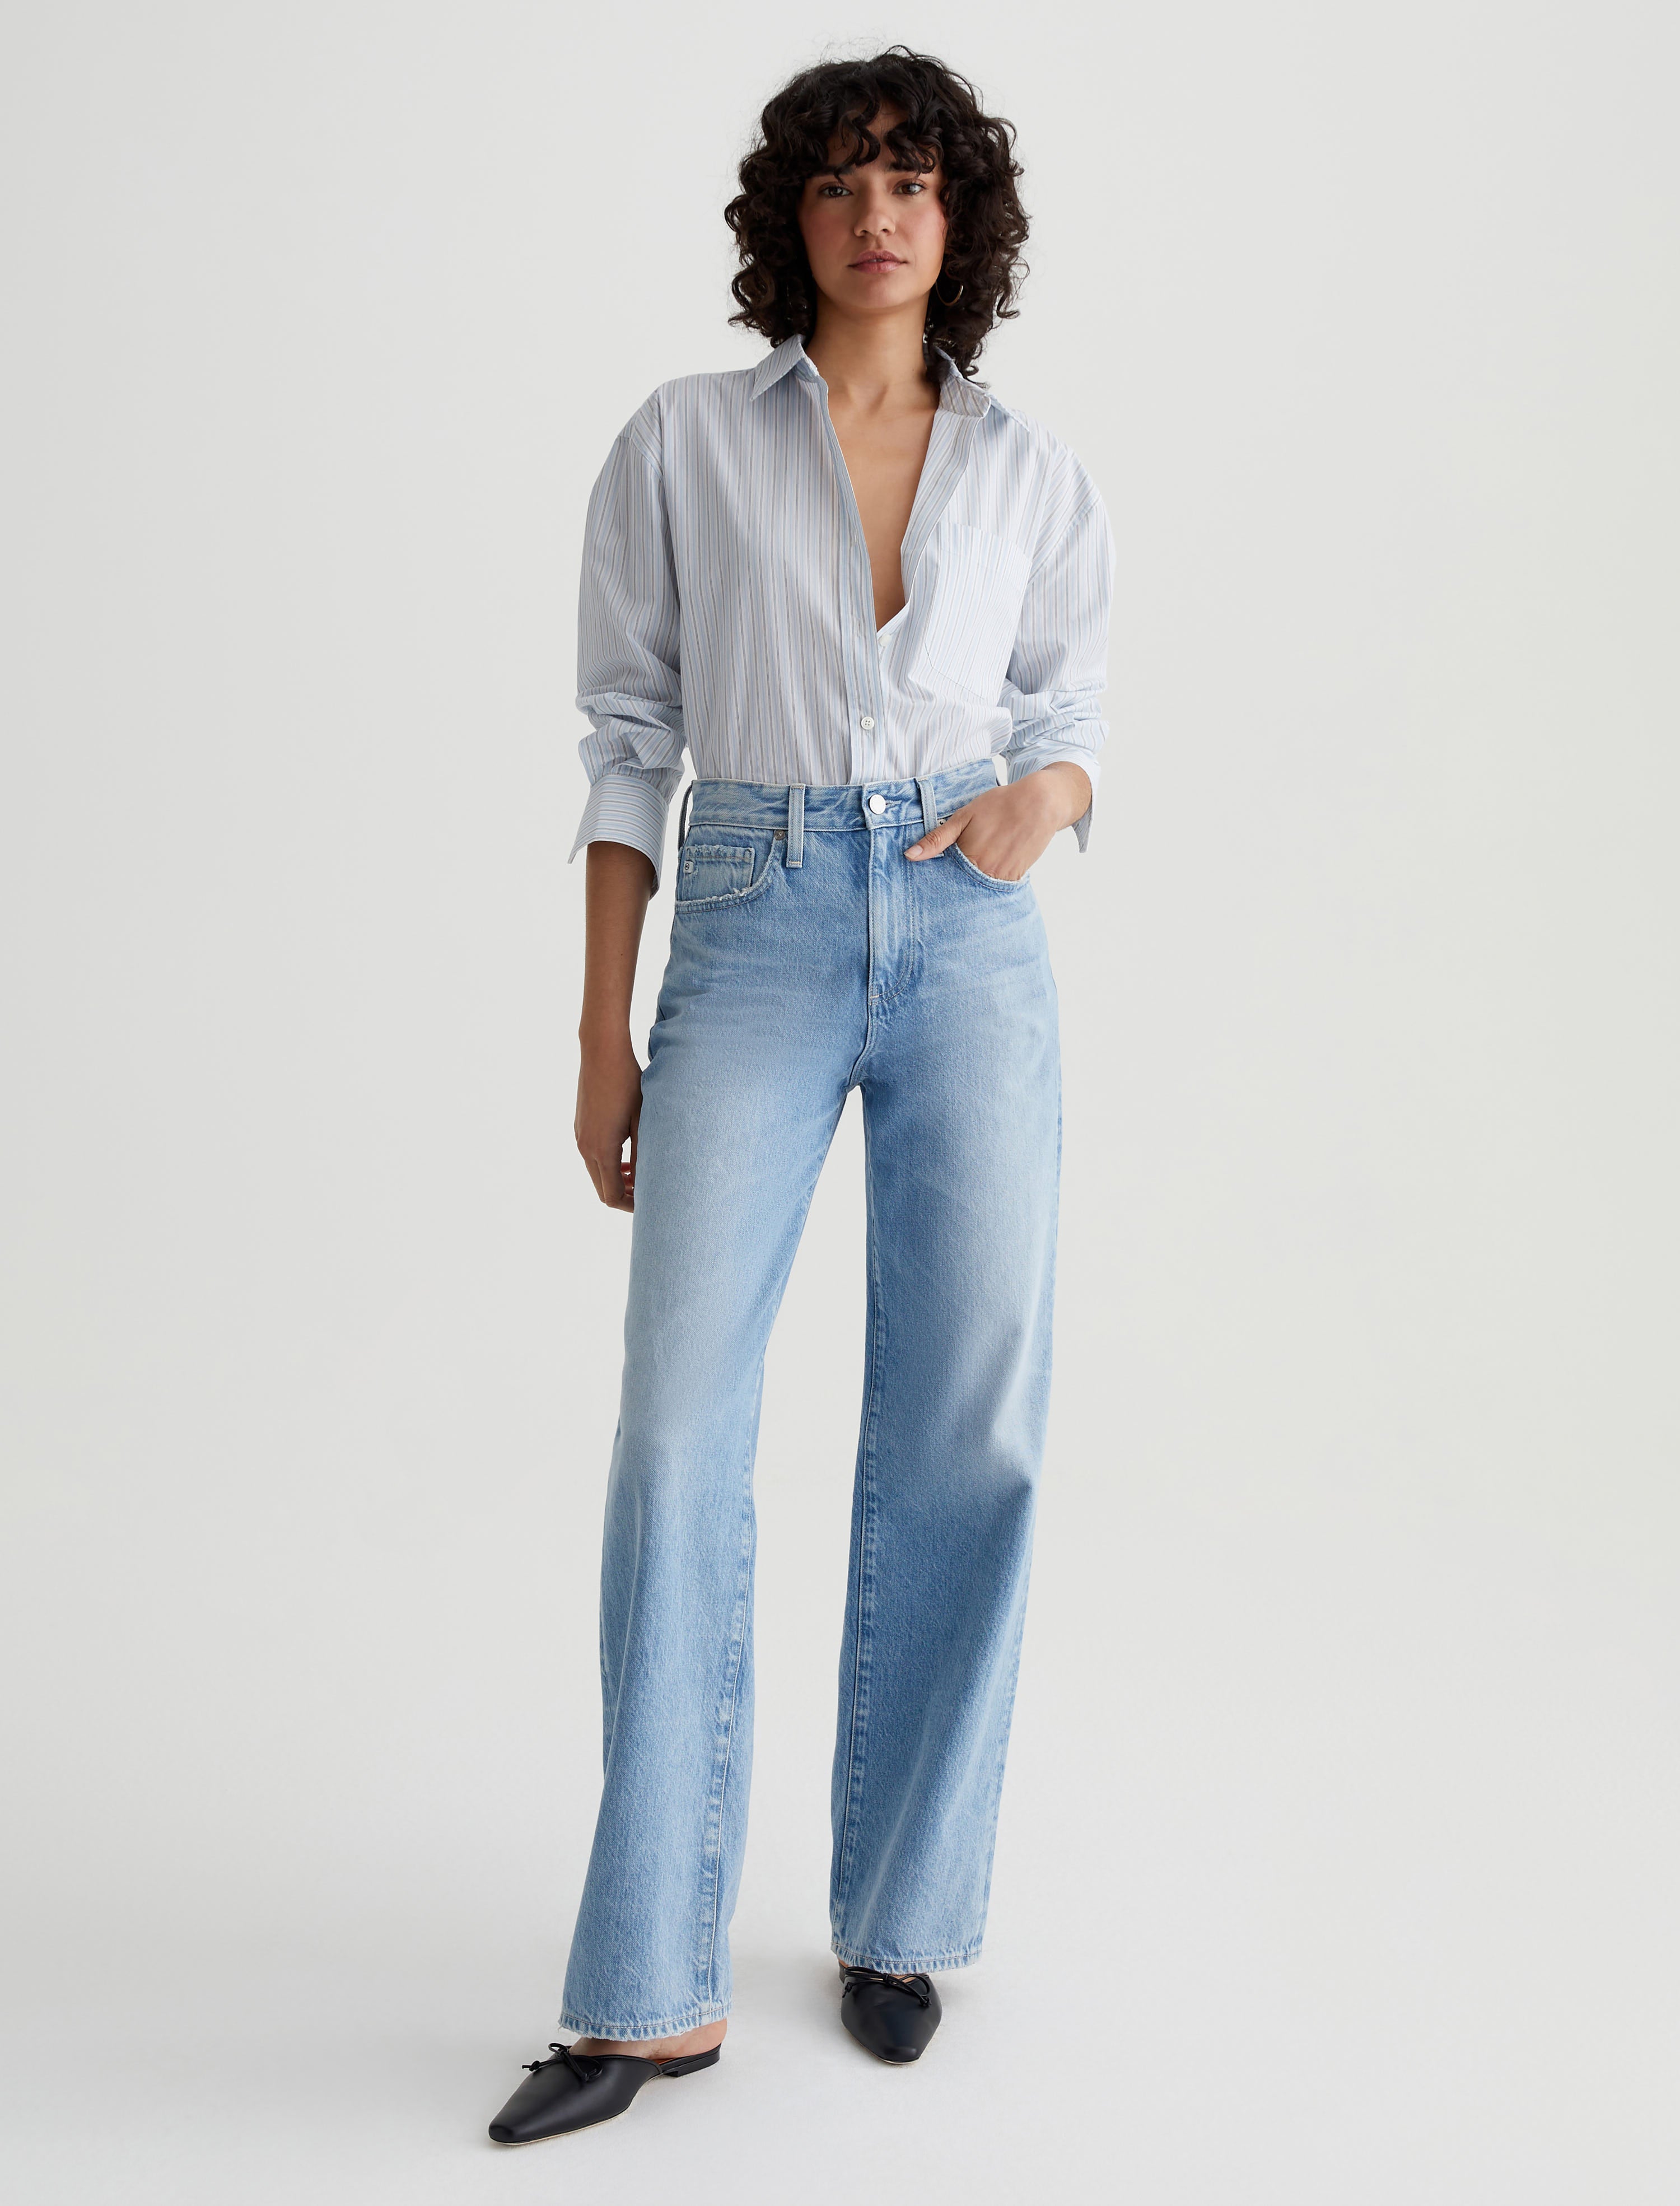 Women Jeans Pant at Rs 899.00/piece